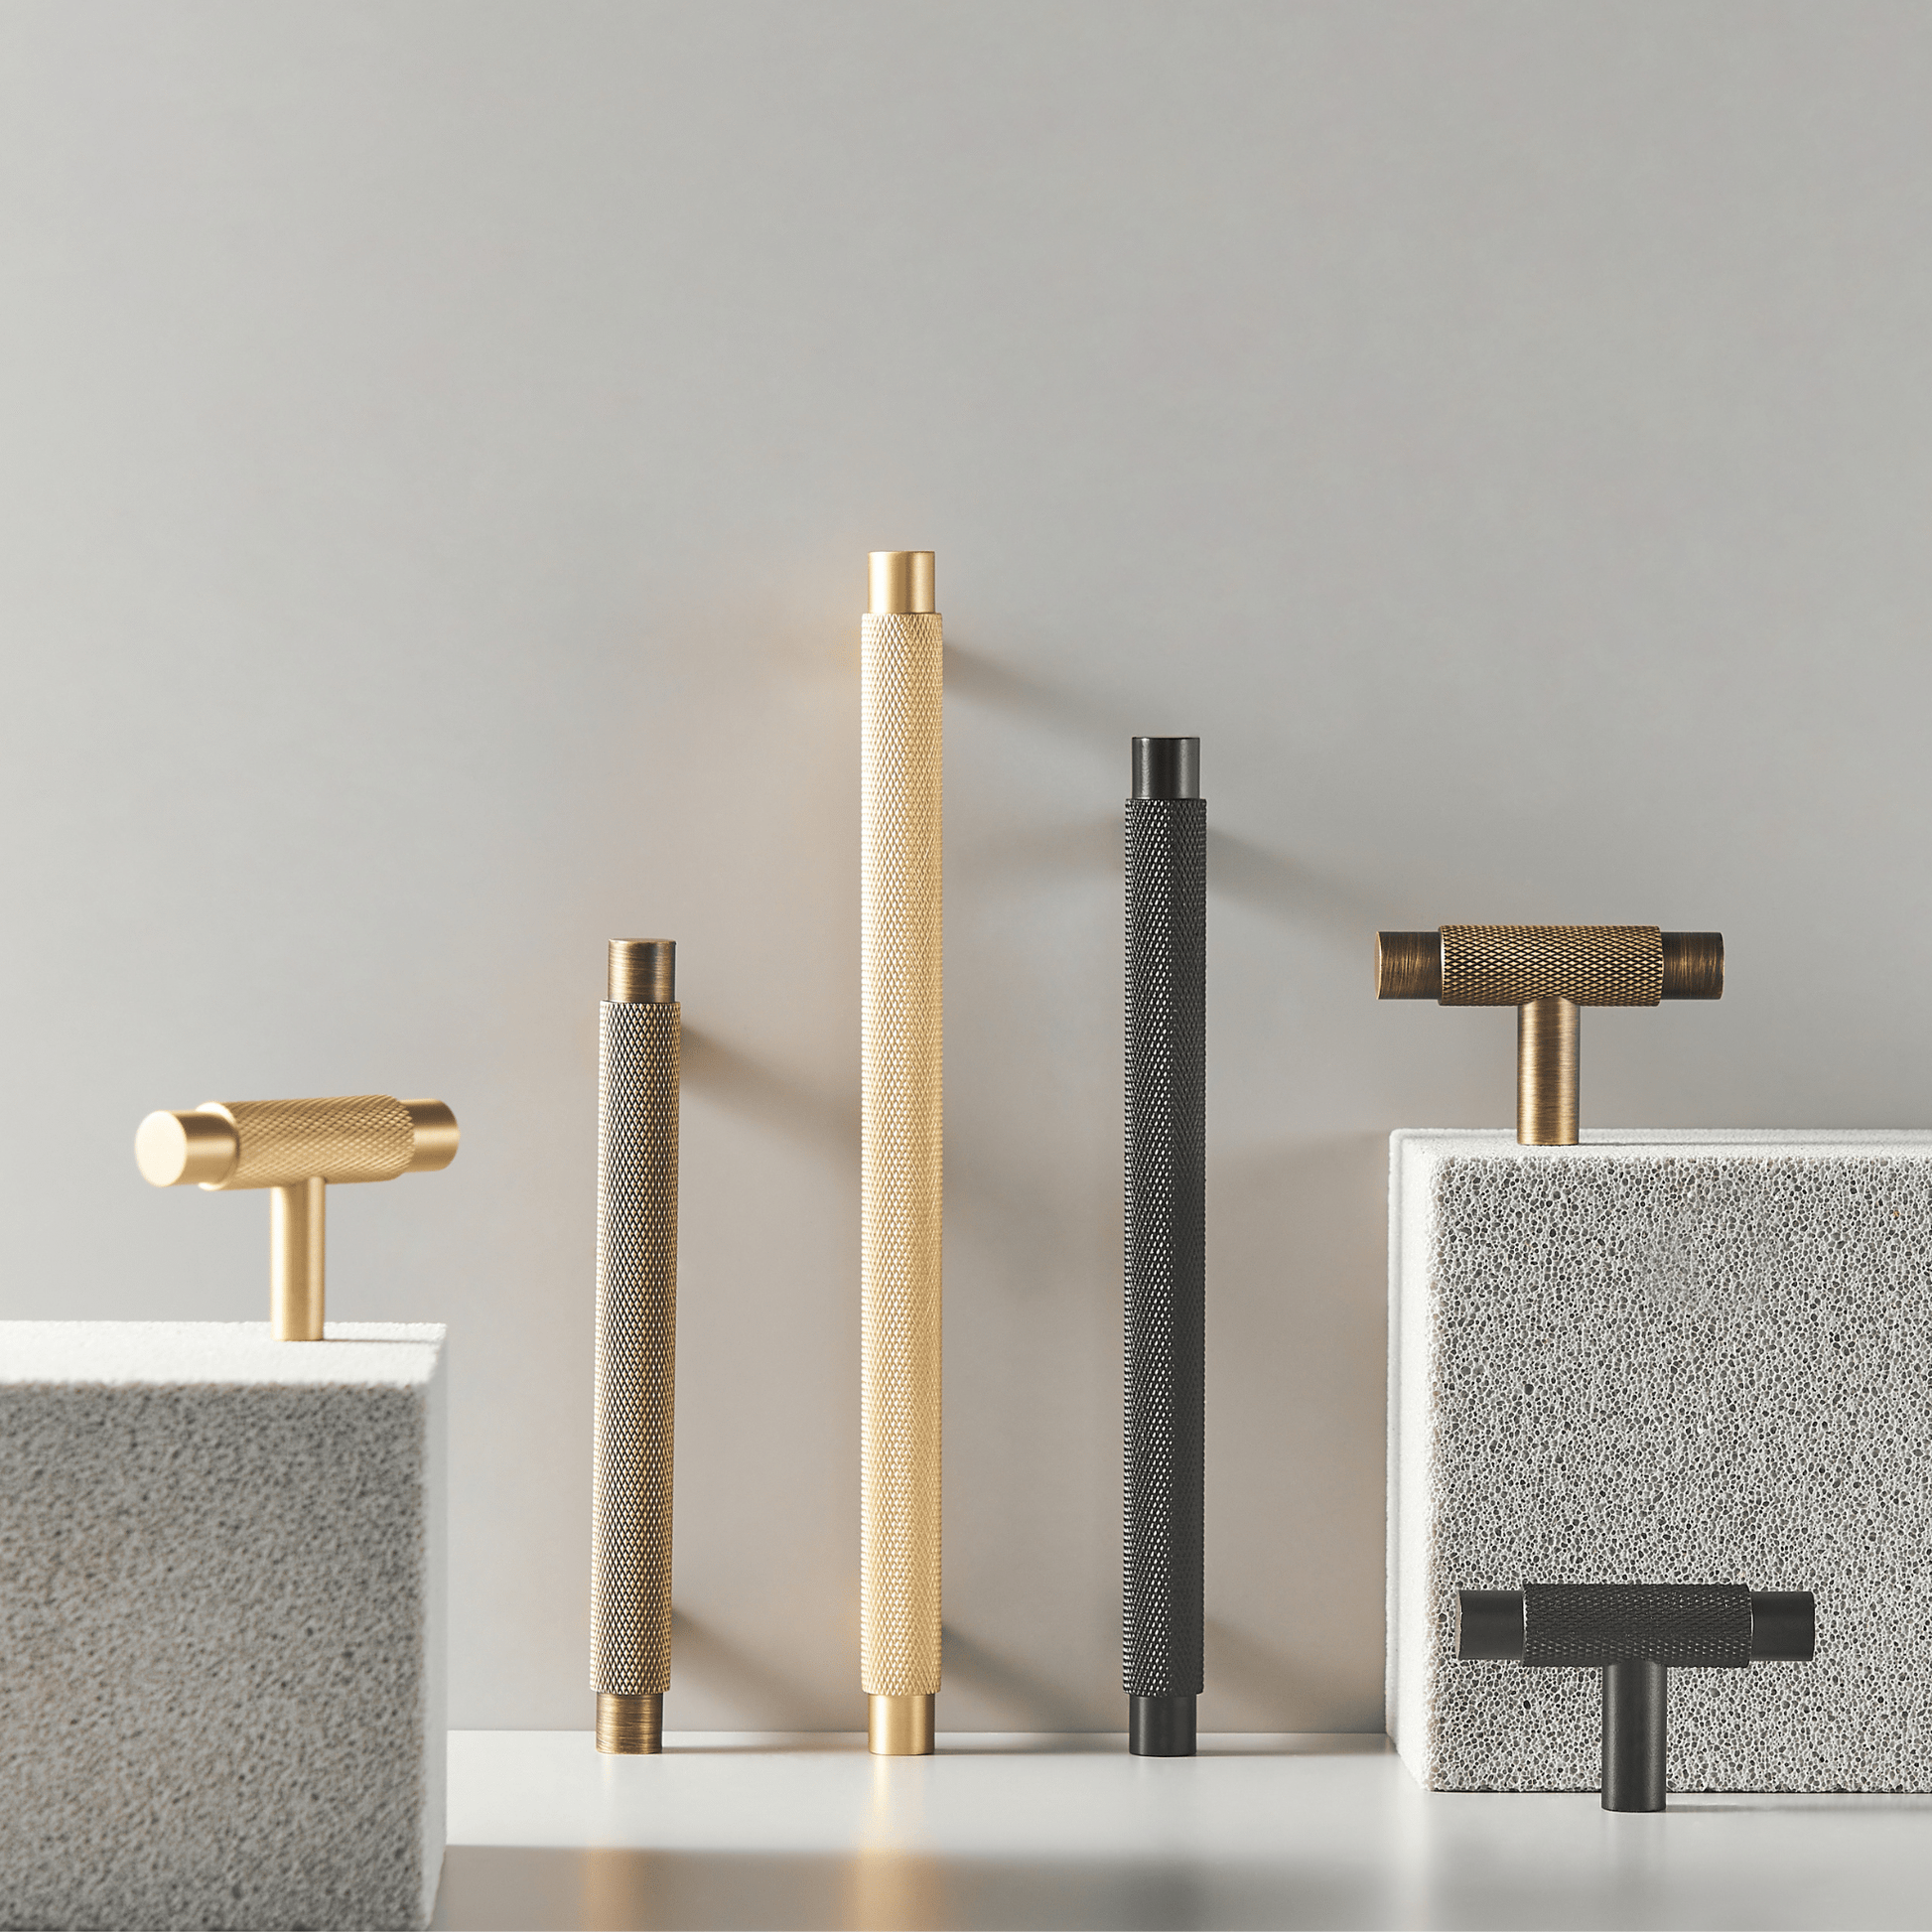 Cabinet Knobs & Handles Bayside Luxe - Sorrento Knurled Brass Handle